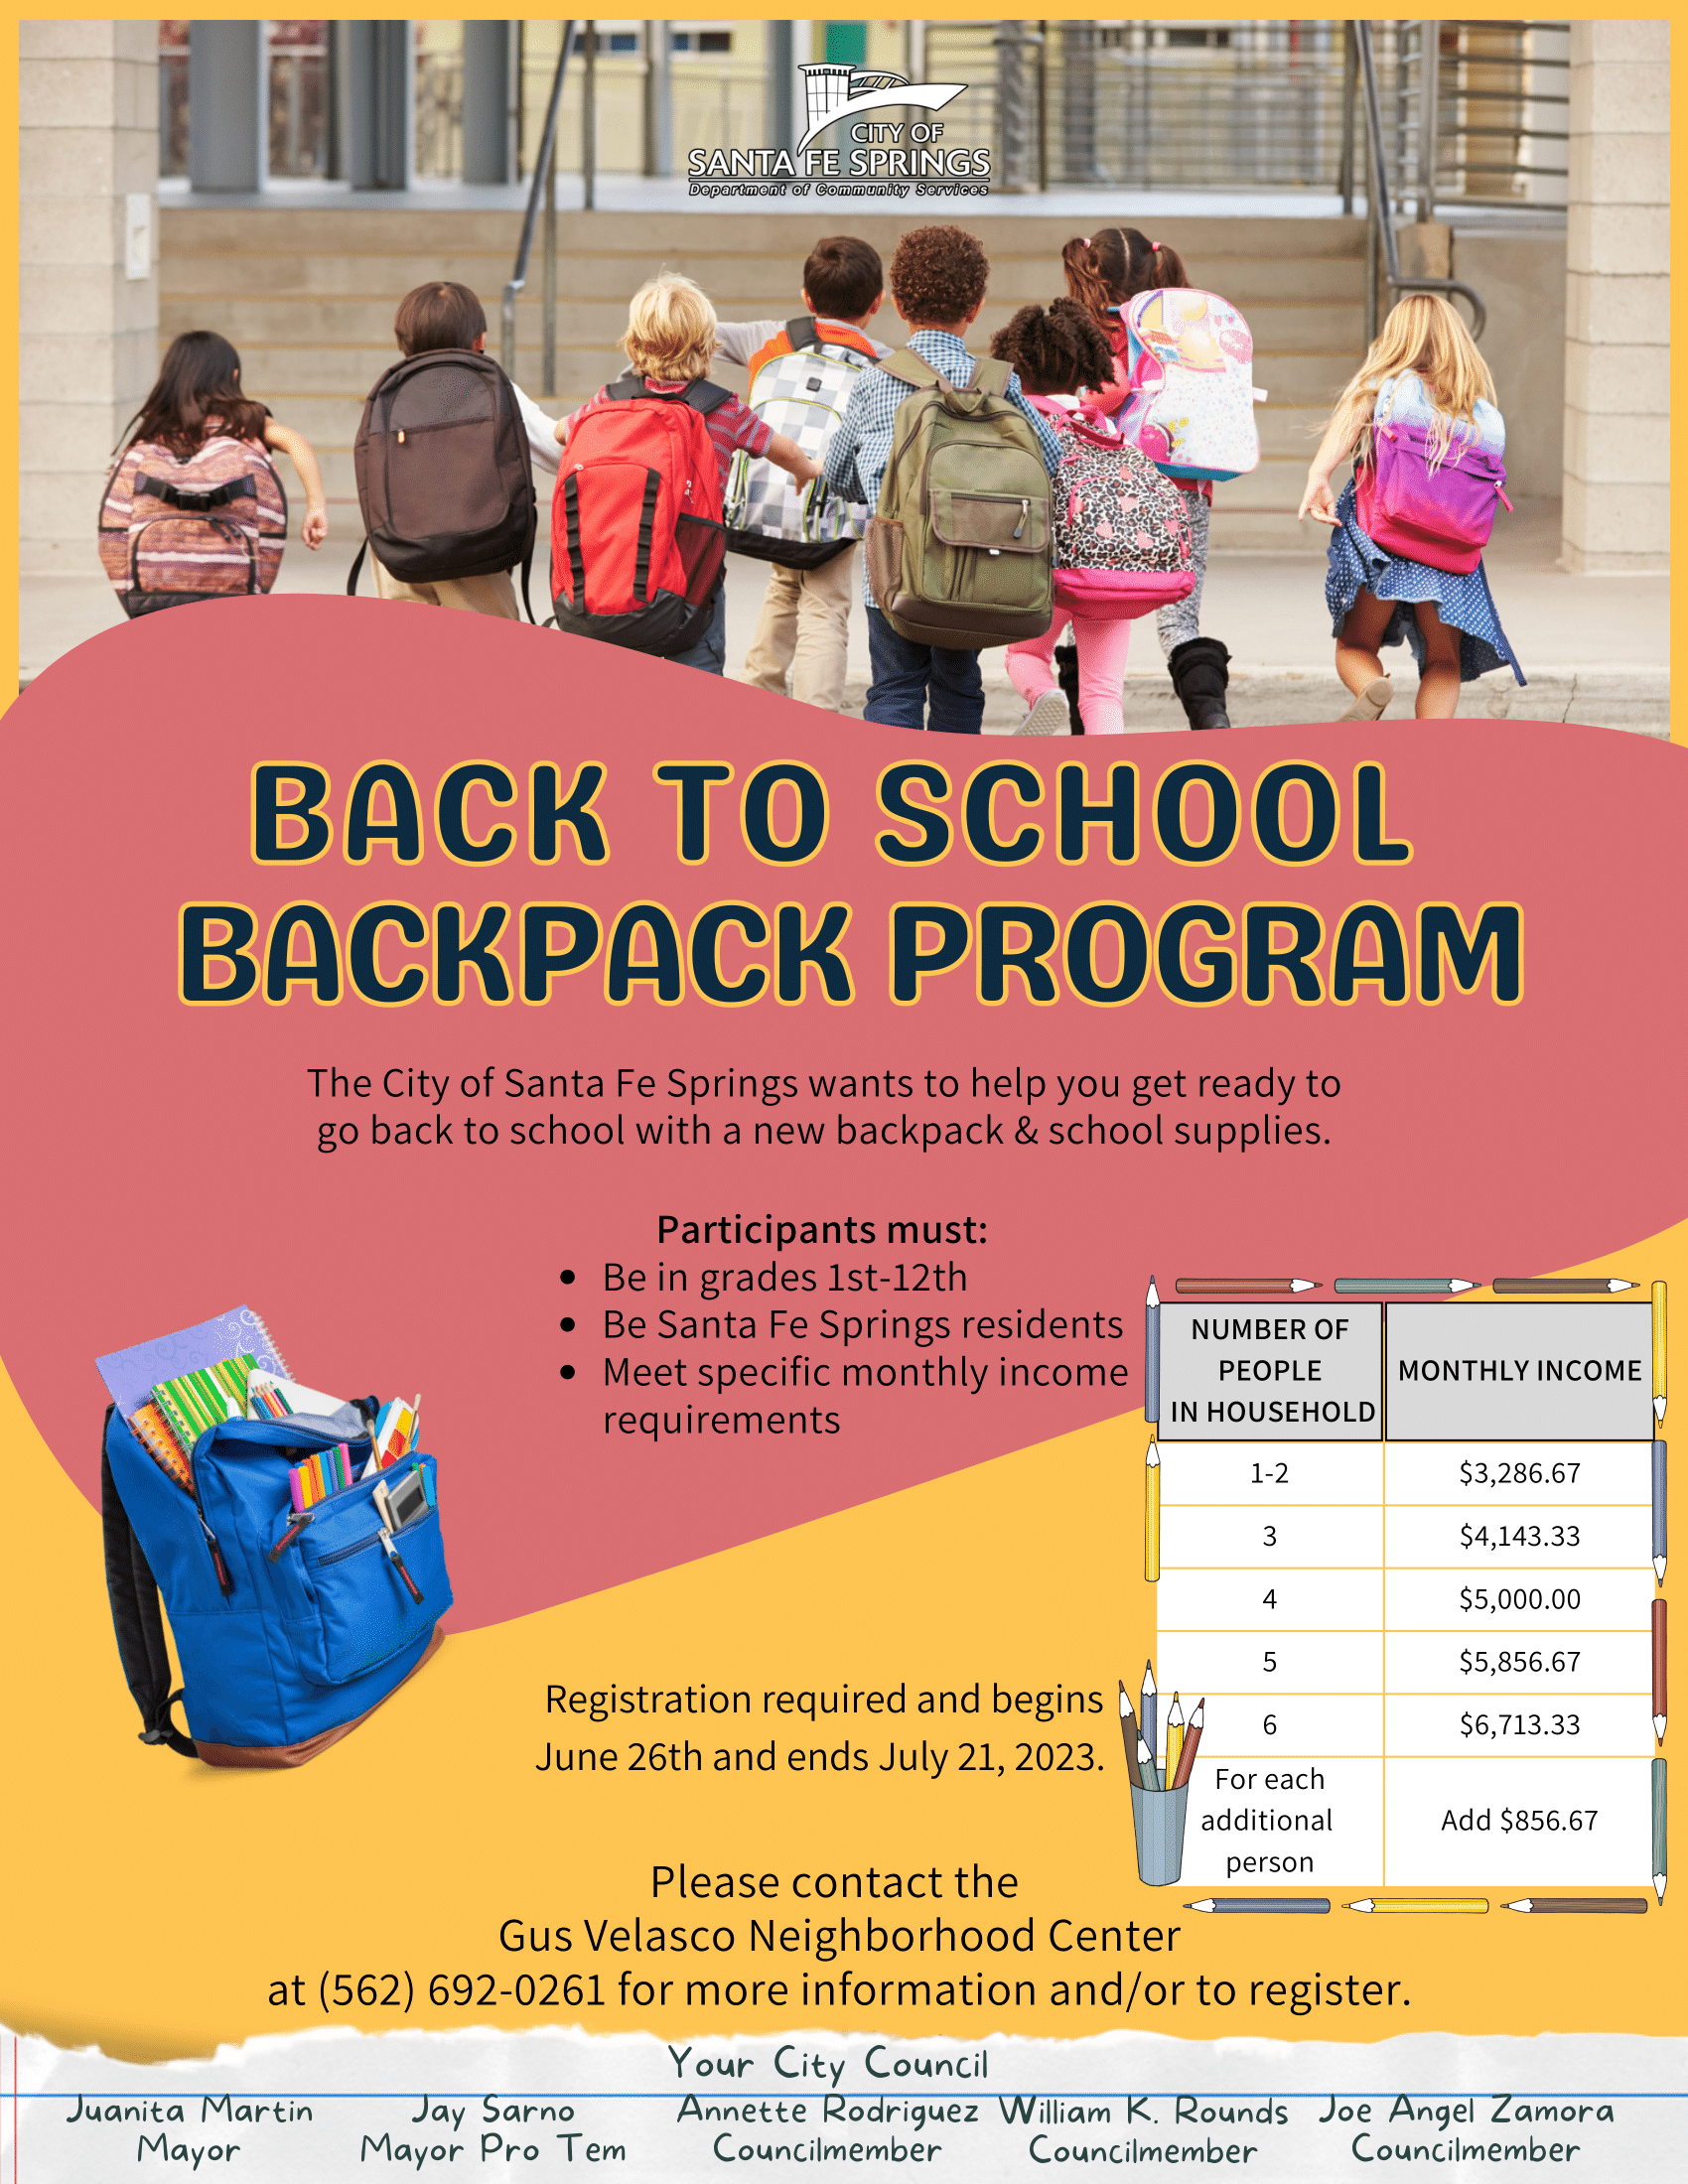   Santa Fe Springs residents, don't miss out on the Back to School Backpack Program! Register by July 21 and secure this fantastic resource for your child's success!  Contact the Gus Velasco Neighborhood Center at (562) 692-0261 for more information and to register.